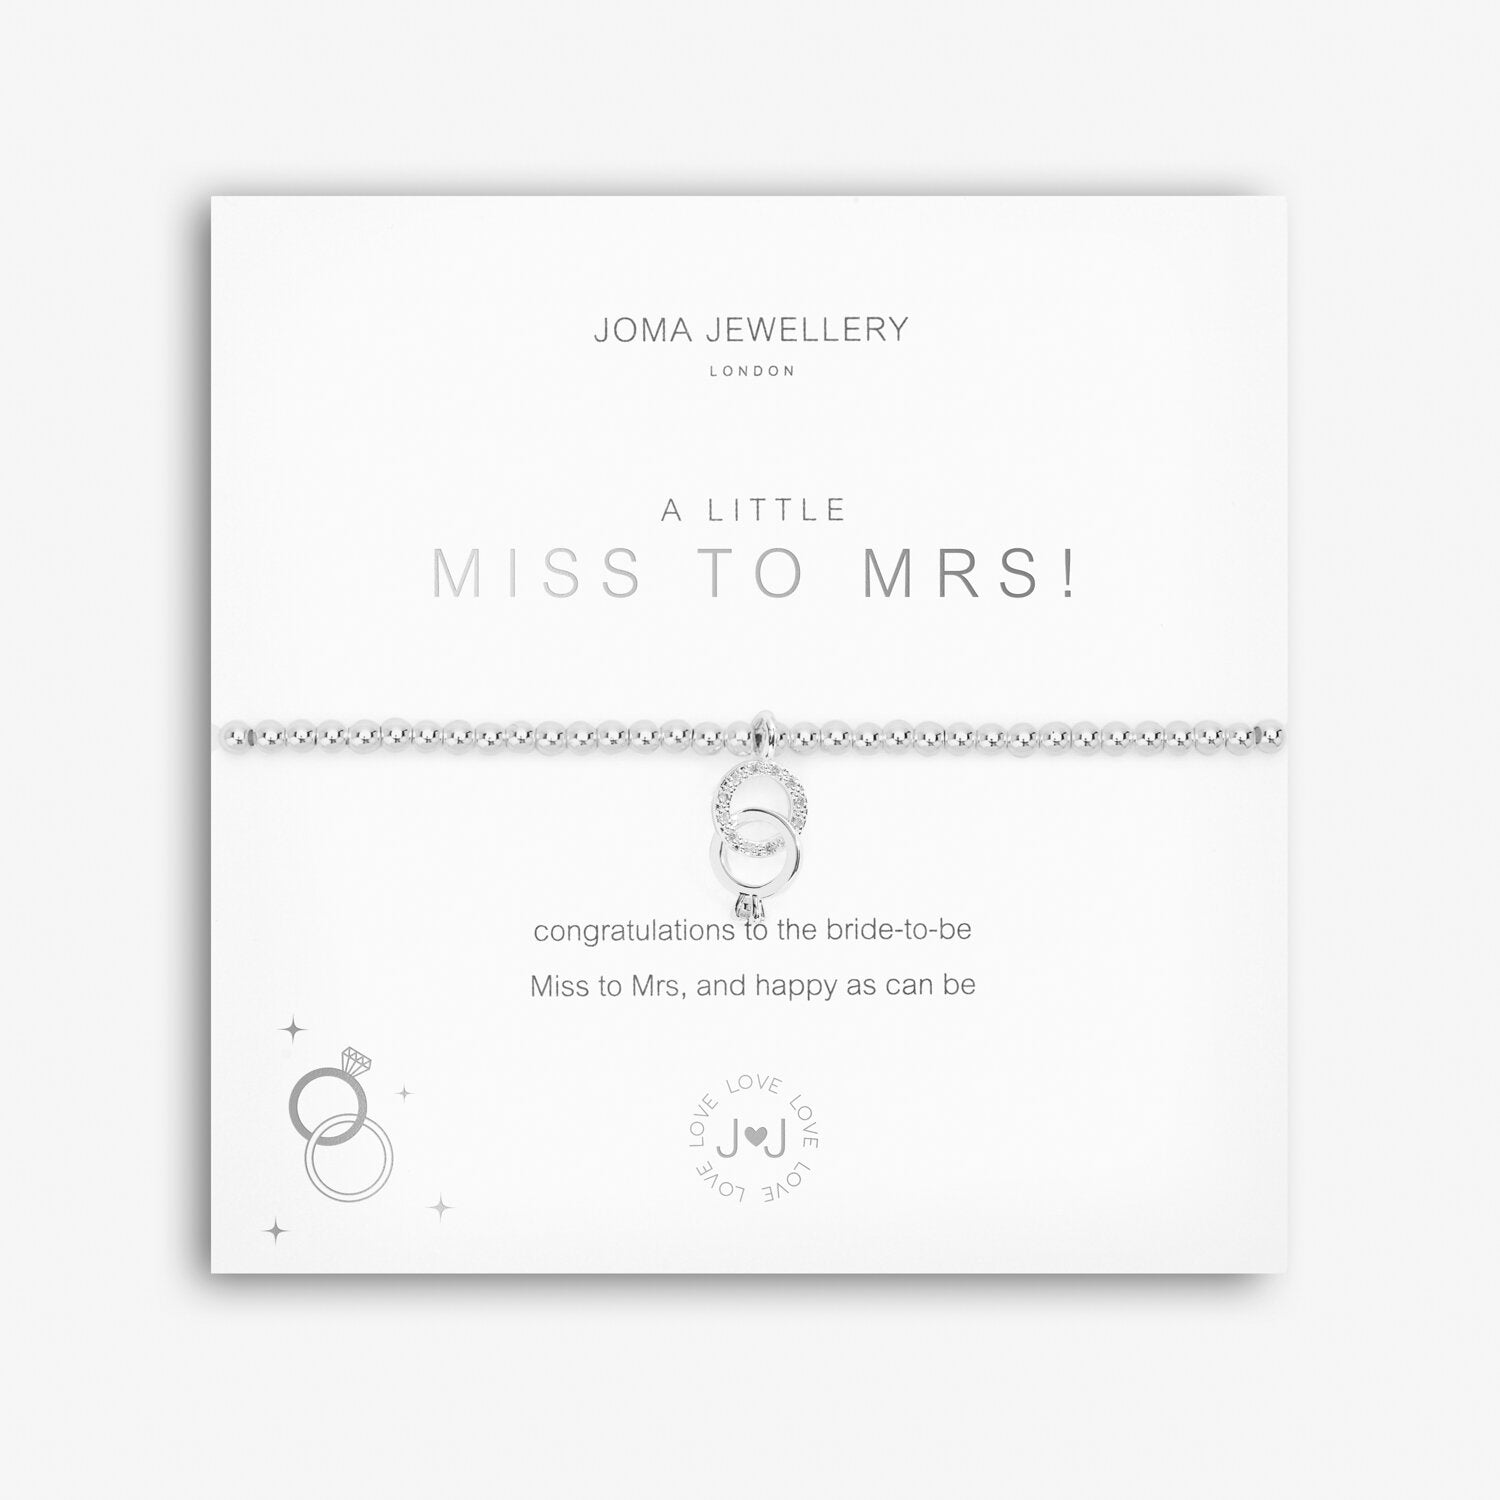 Joma Jewellery A Little 'Miss to Mrs!' Bracelet | More Than Just A Gift